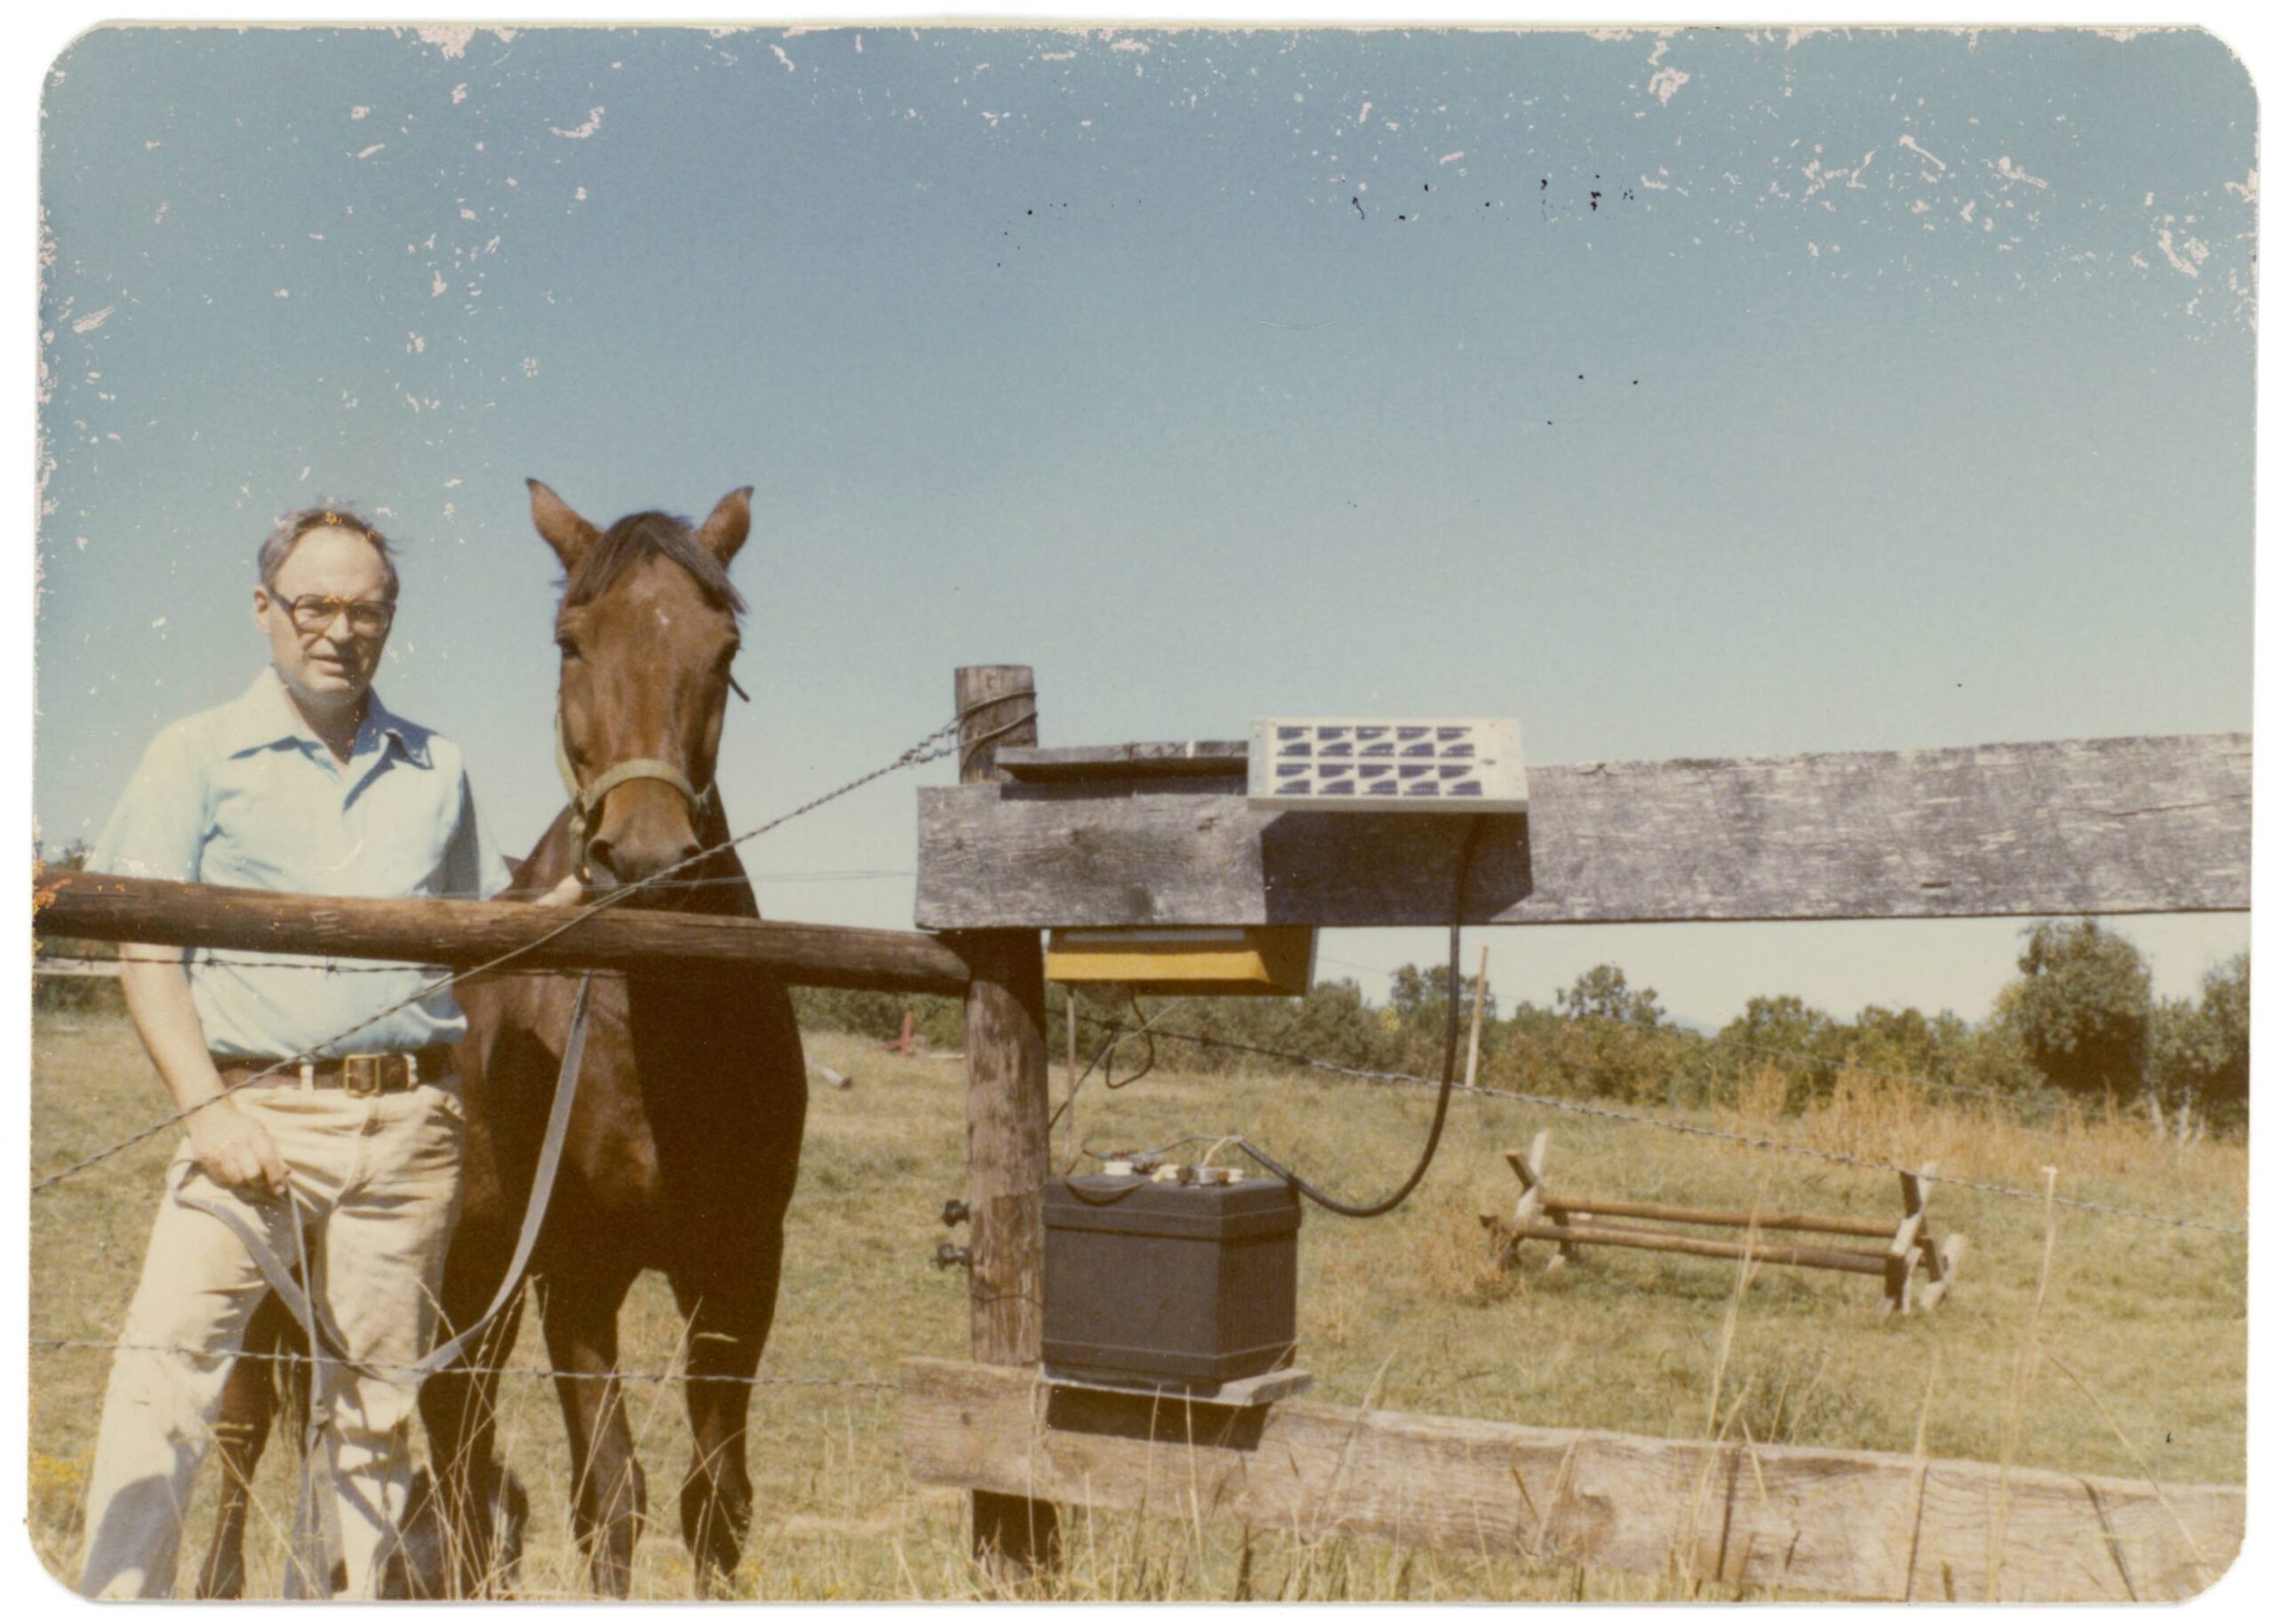 Lathrop in a field standing next to a horse